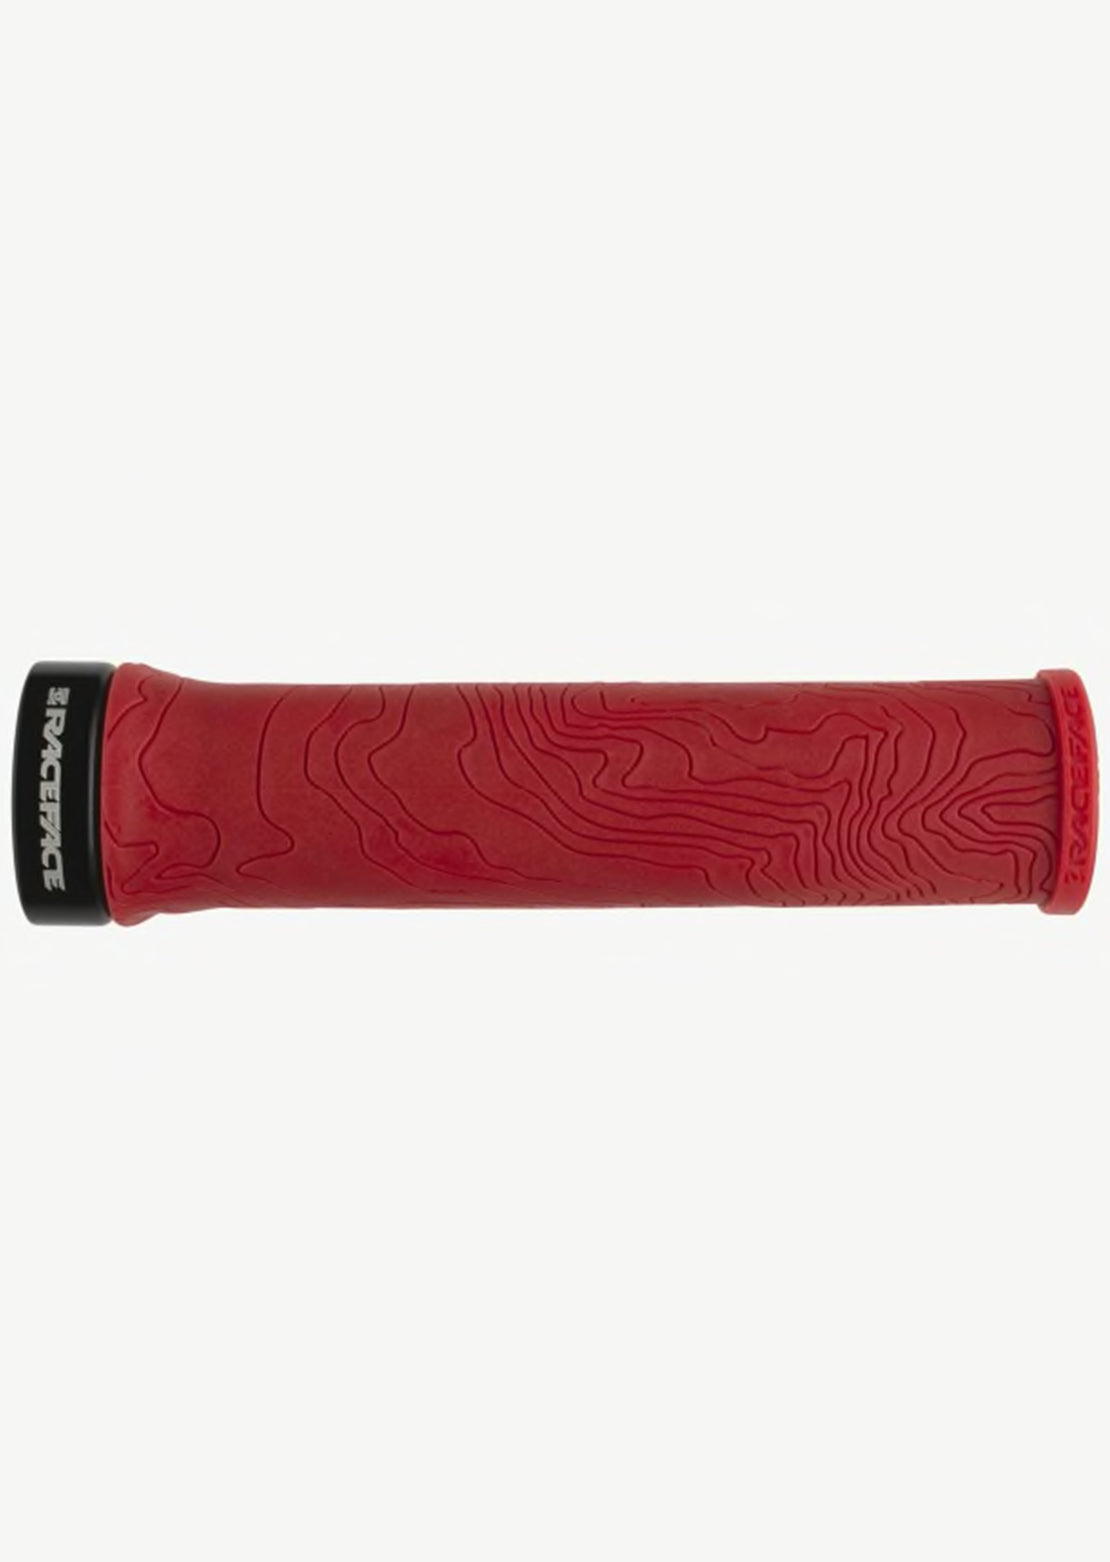 Race Face Half Nelson Mountain Bike Grip Red Front